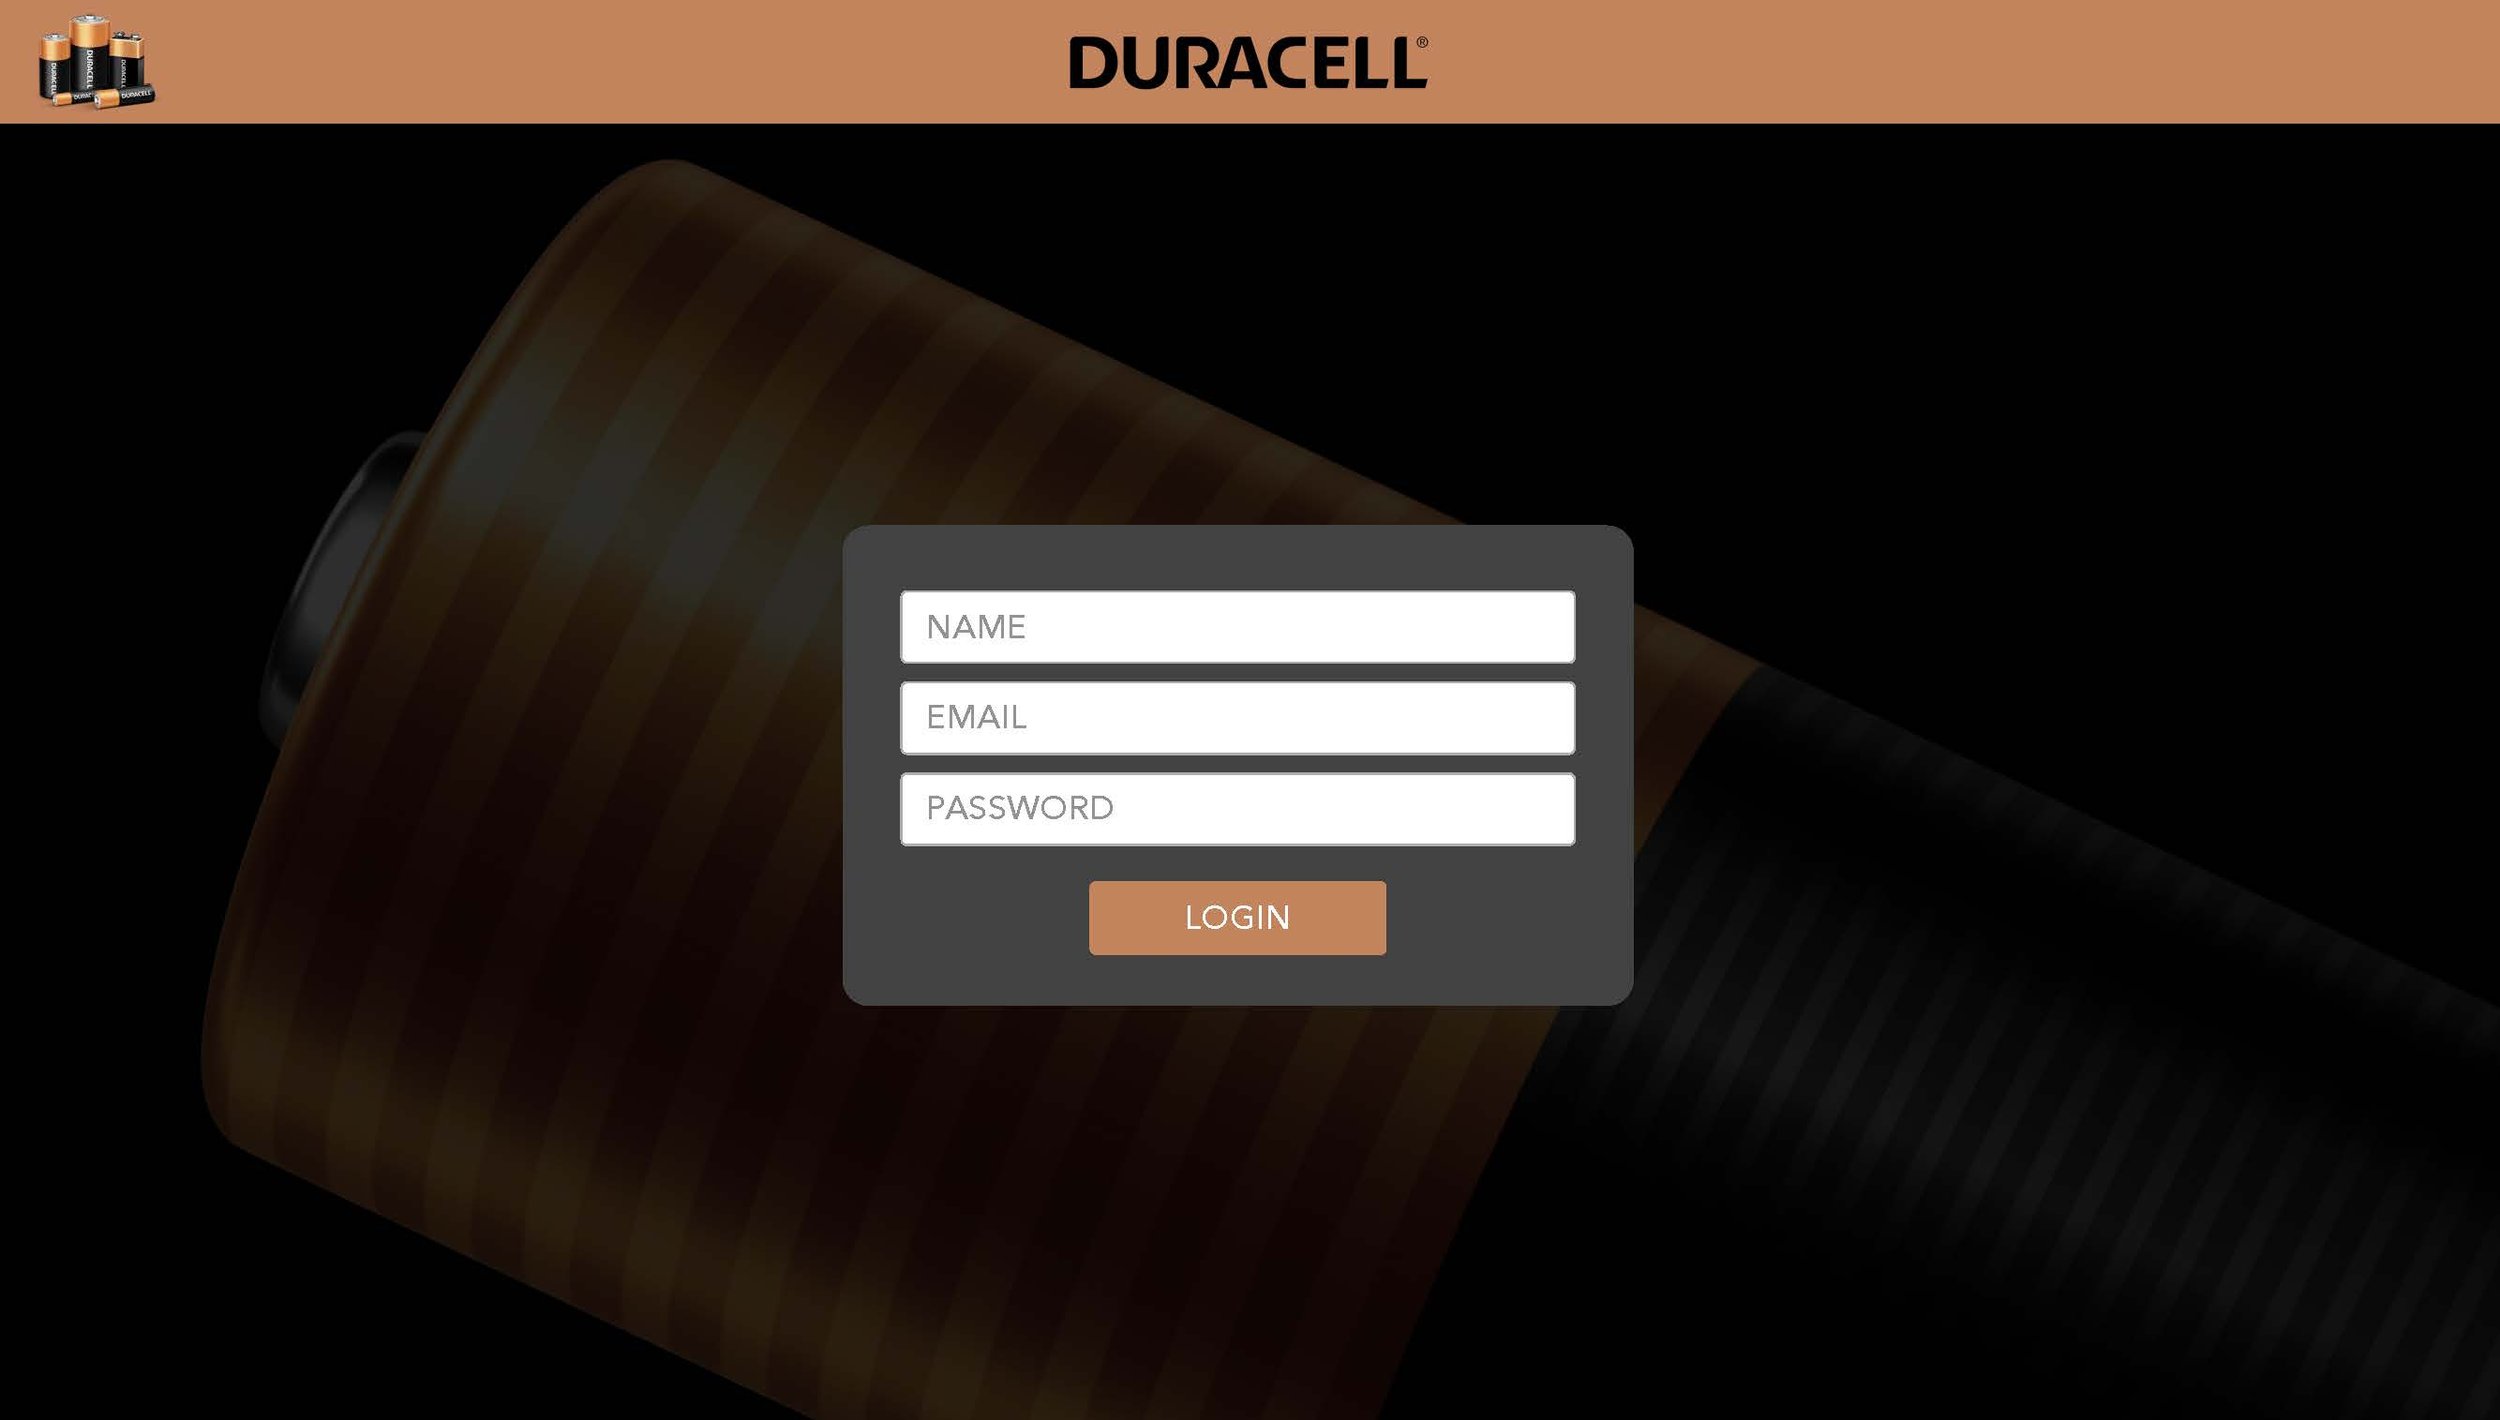 Duracell_Wireframe_final_V2_Page_01.jpg